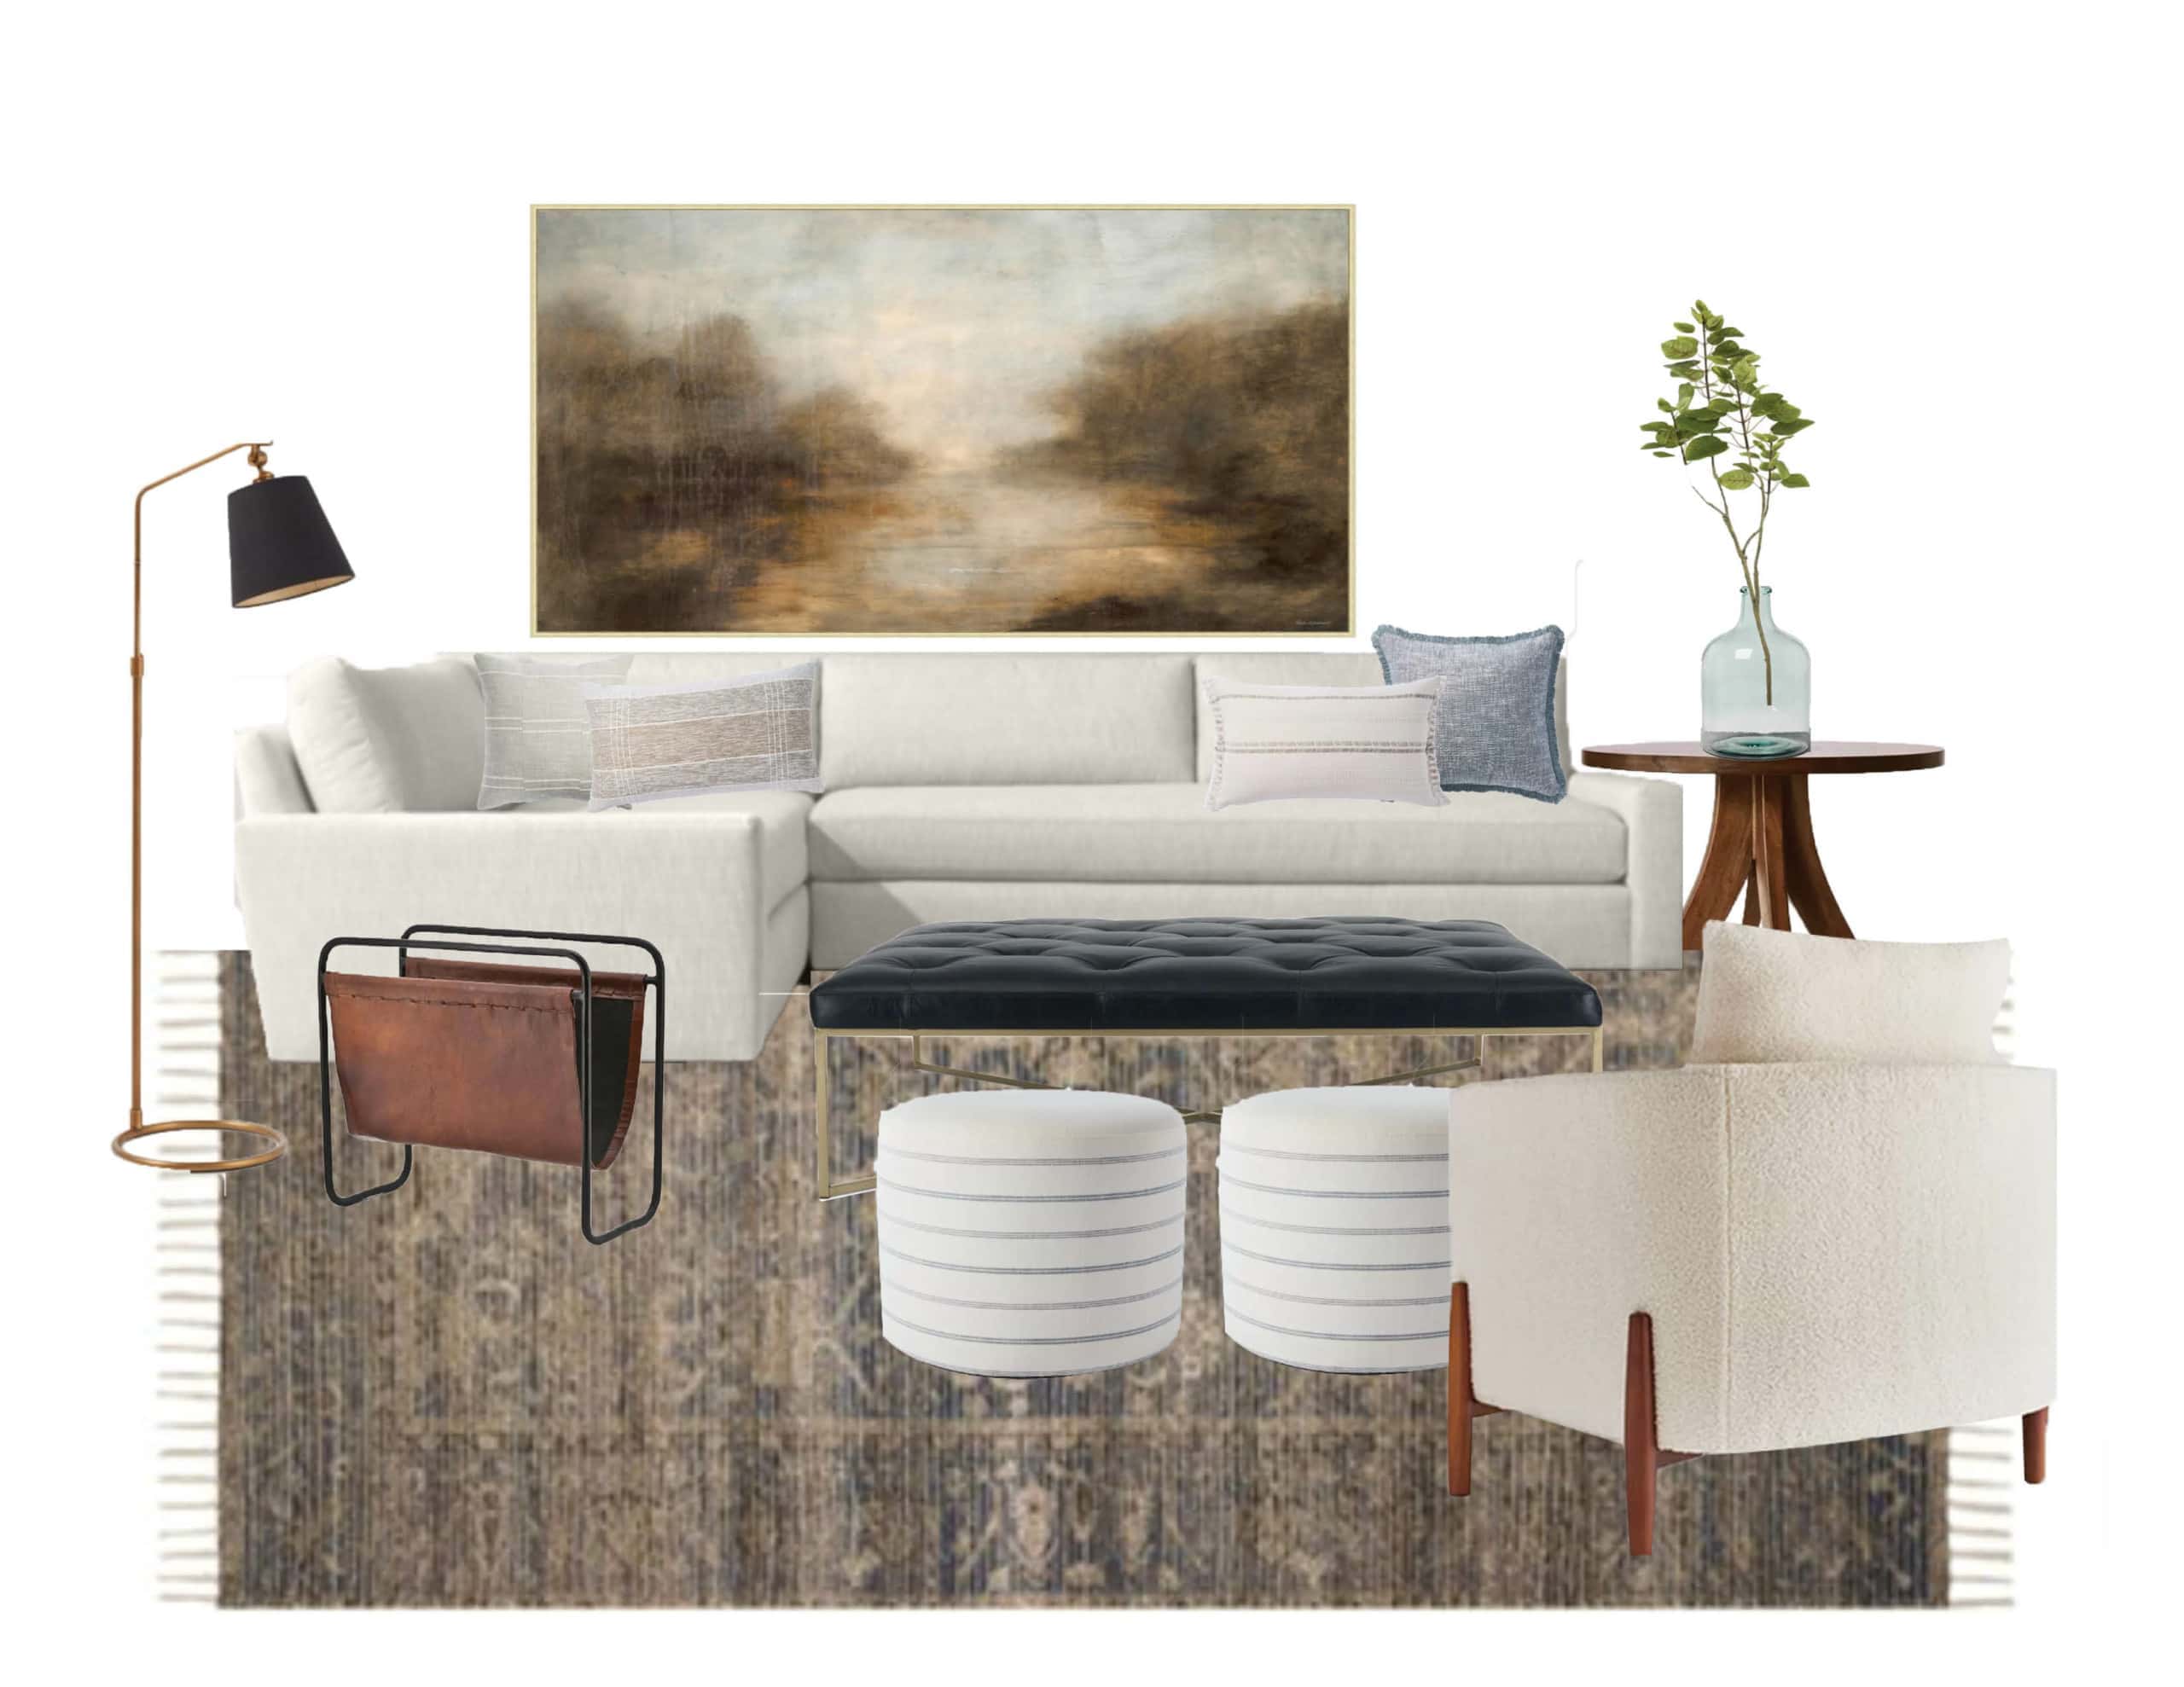 Figuring out the best living room furniture layout